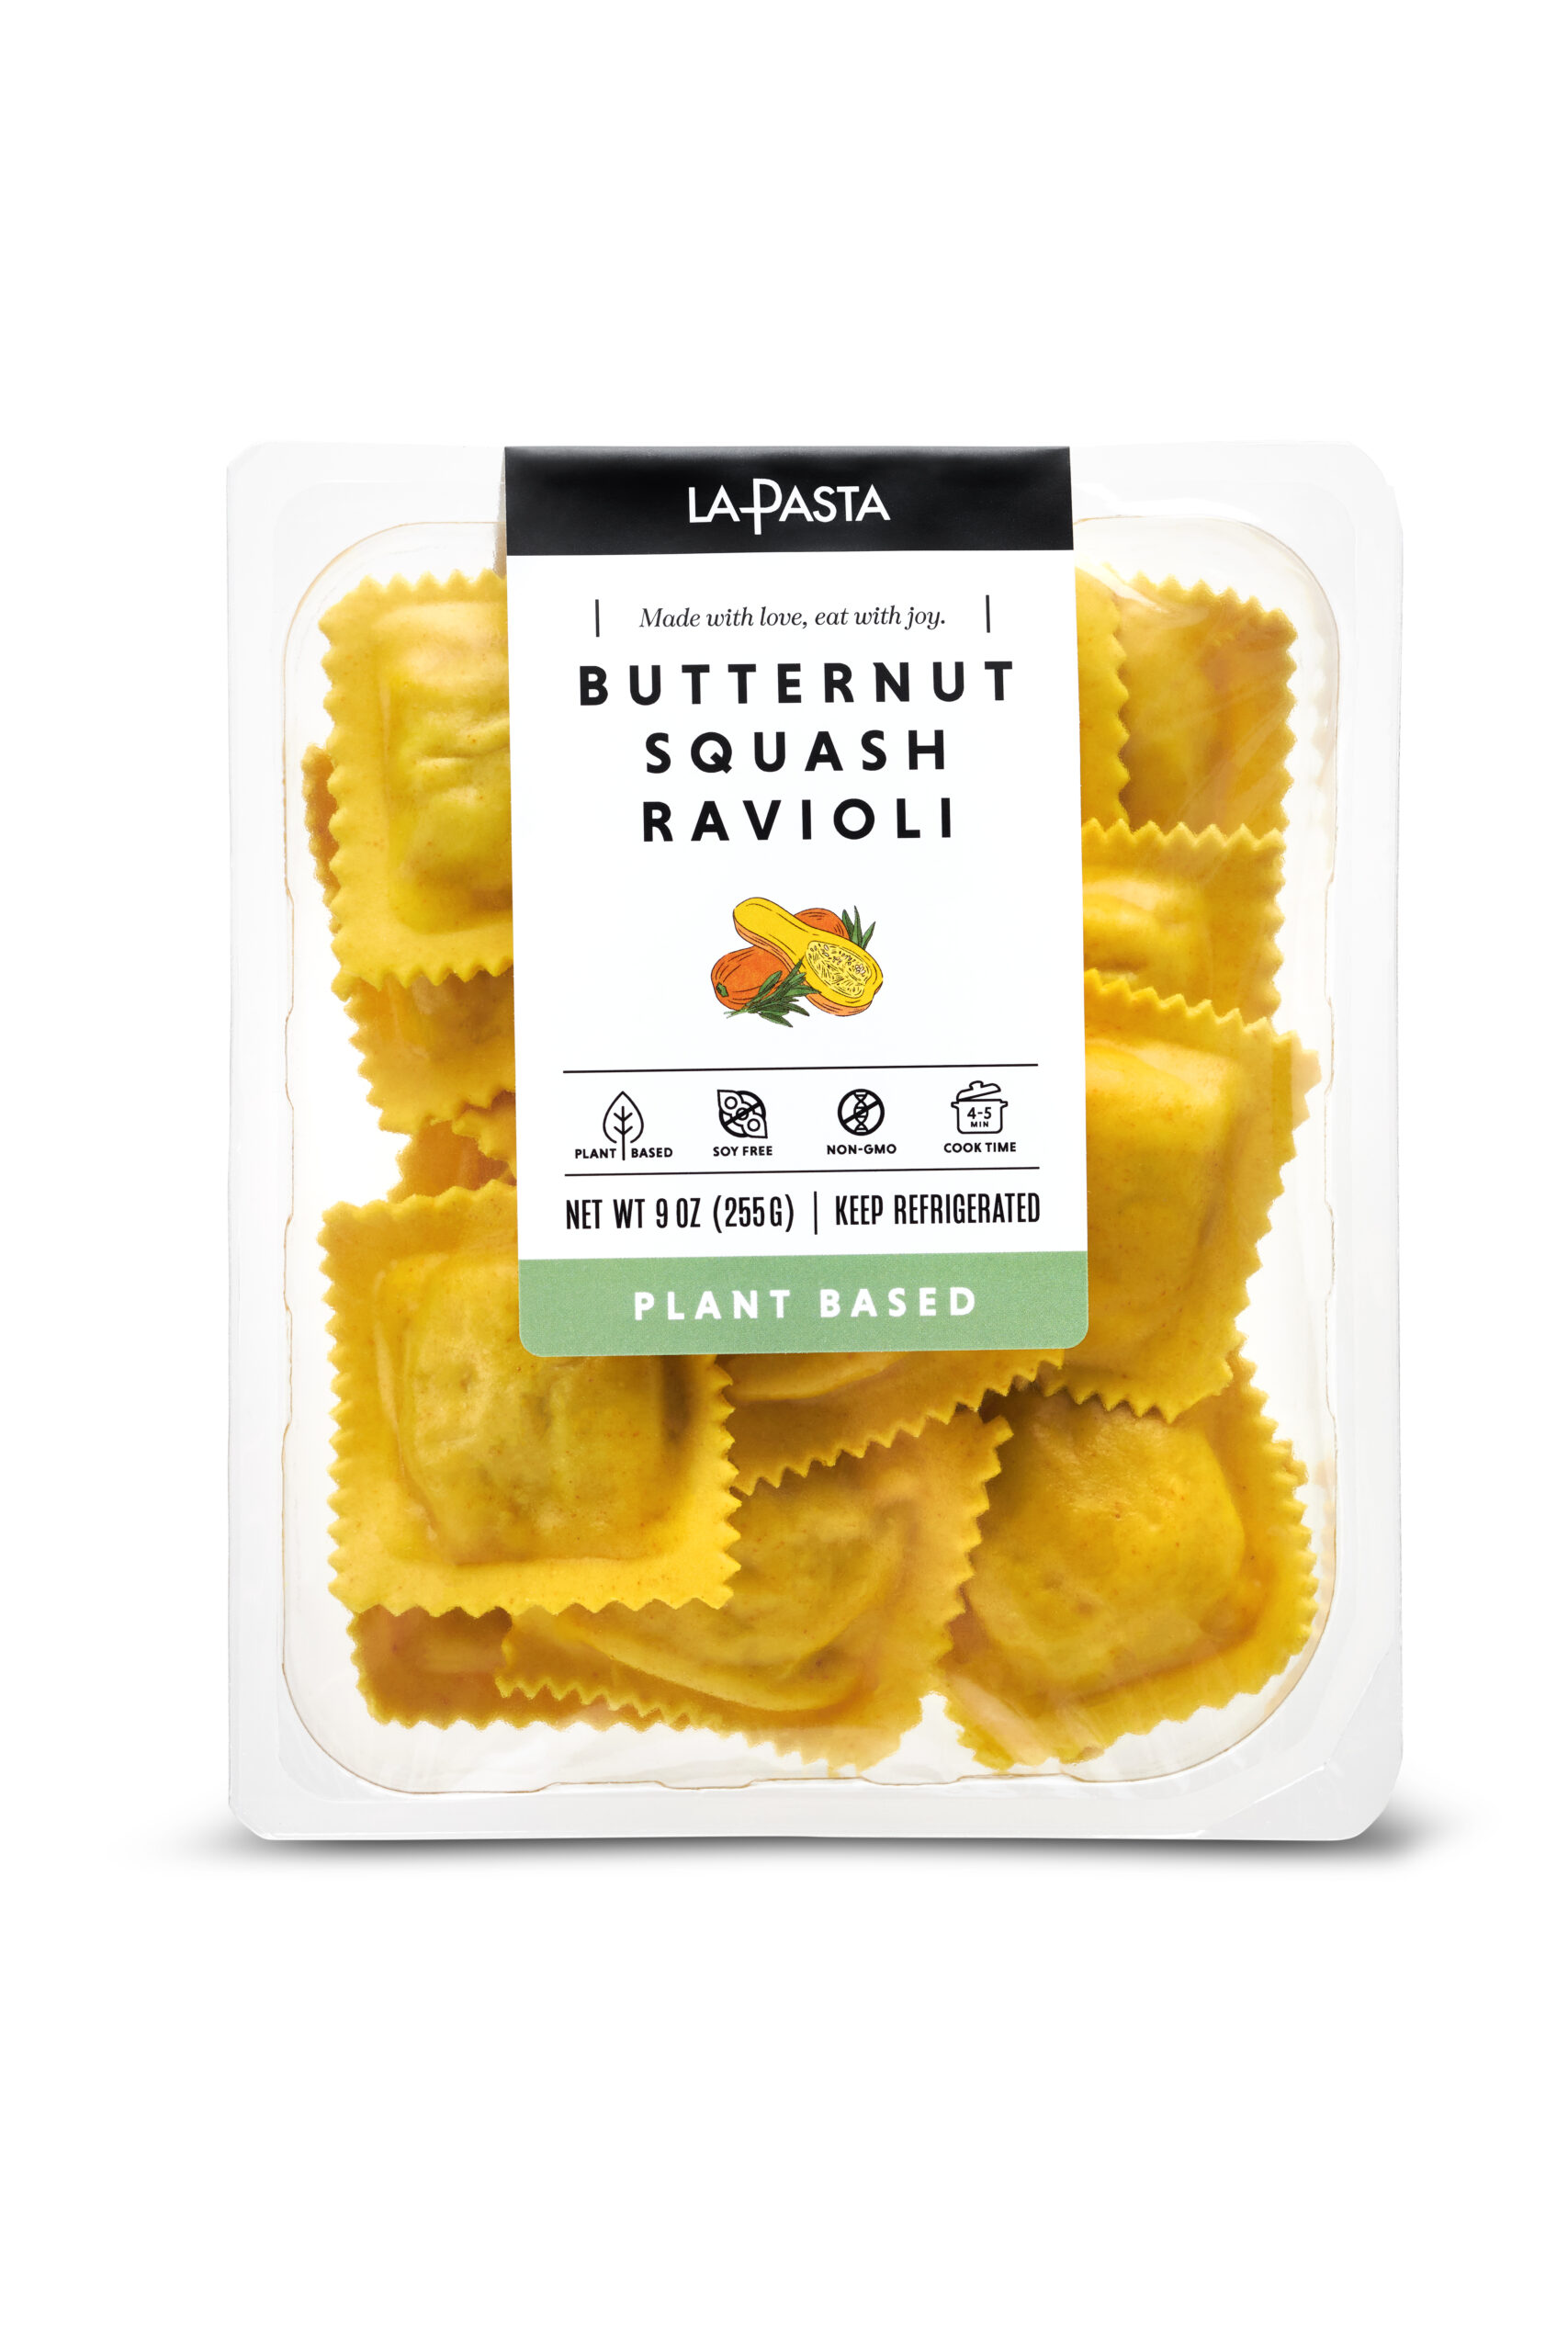 A package of butternut squash ravioli is shown.